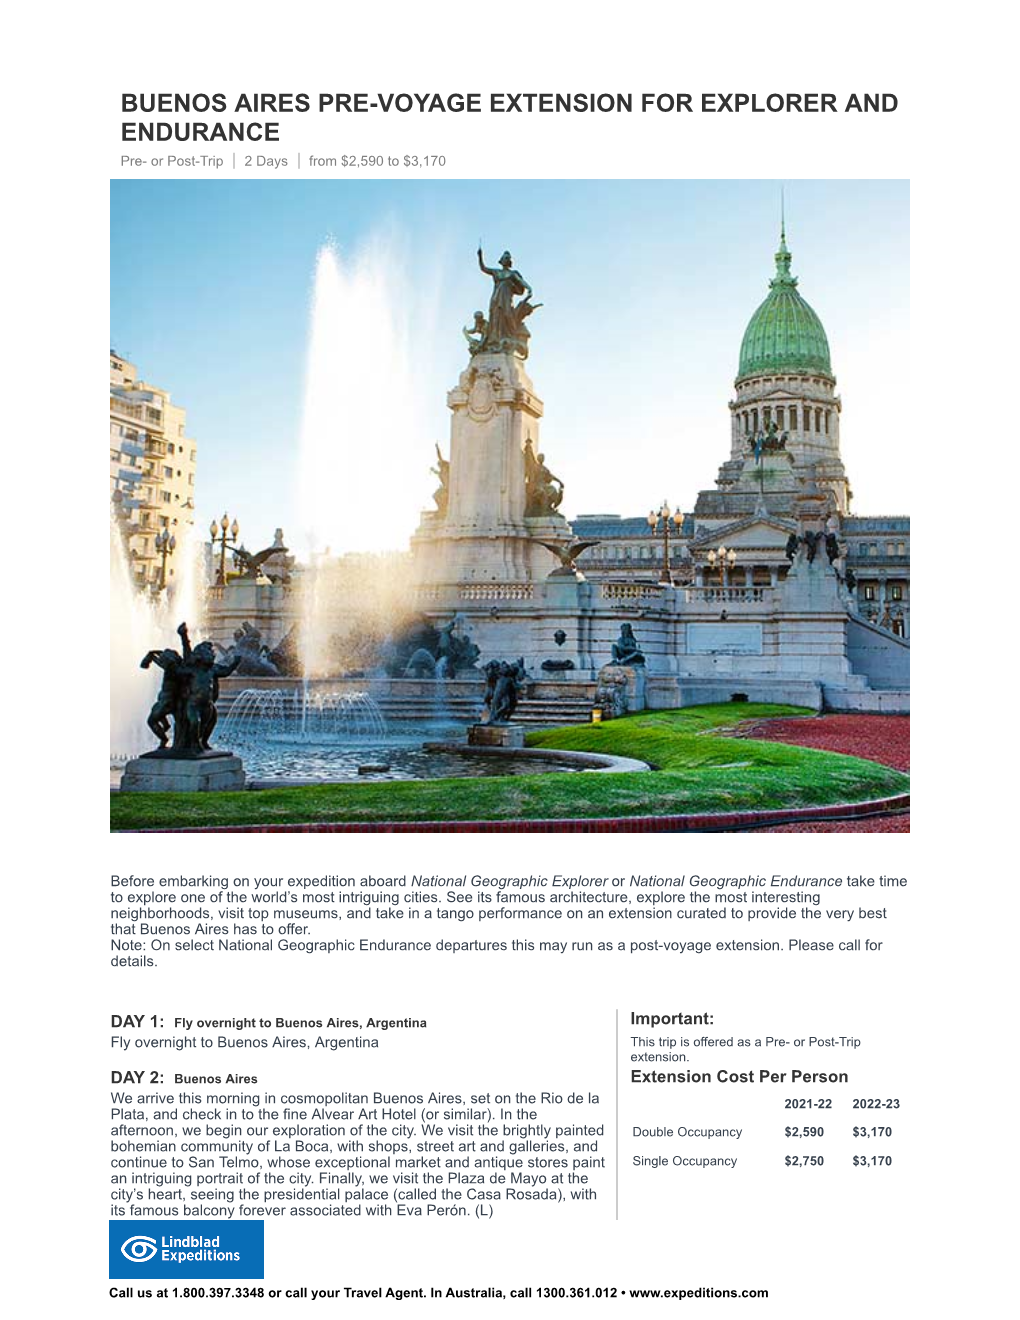 BUENOS AIRES PRE-VOYAGE EXTENSION for EXPLORER and ENDURANCE Pre- Or Post-Trip 2 Days from $2,590 to $3,170